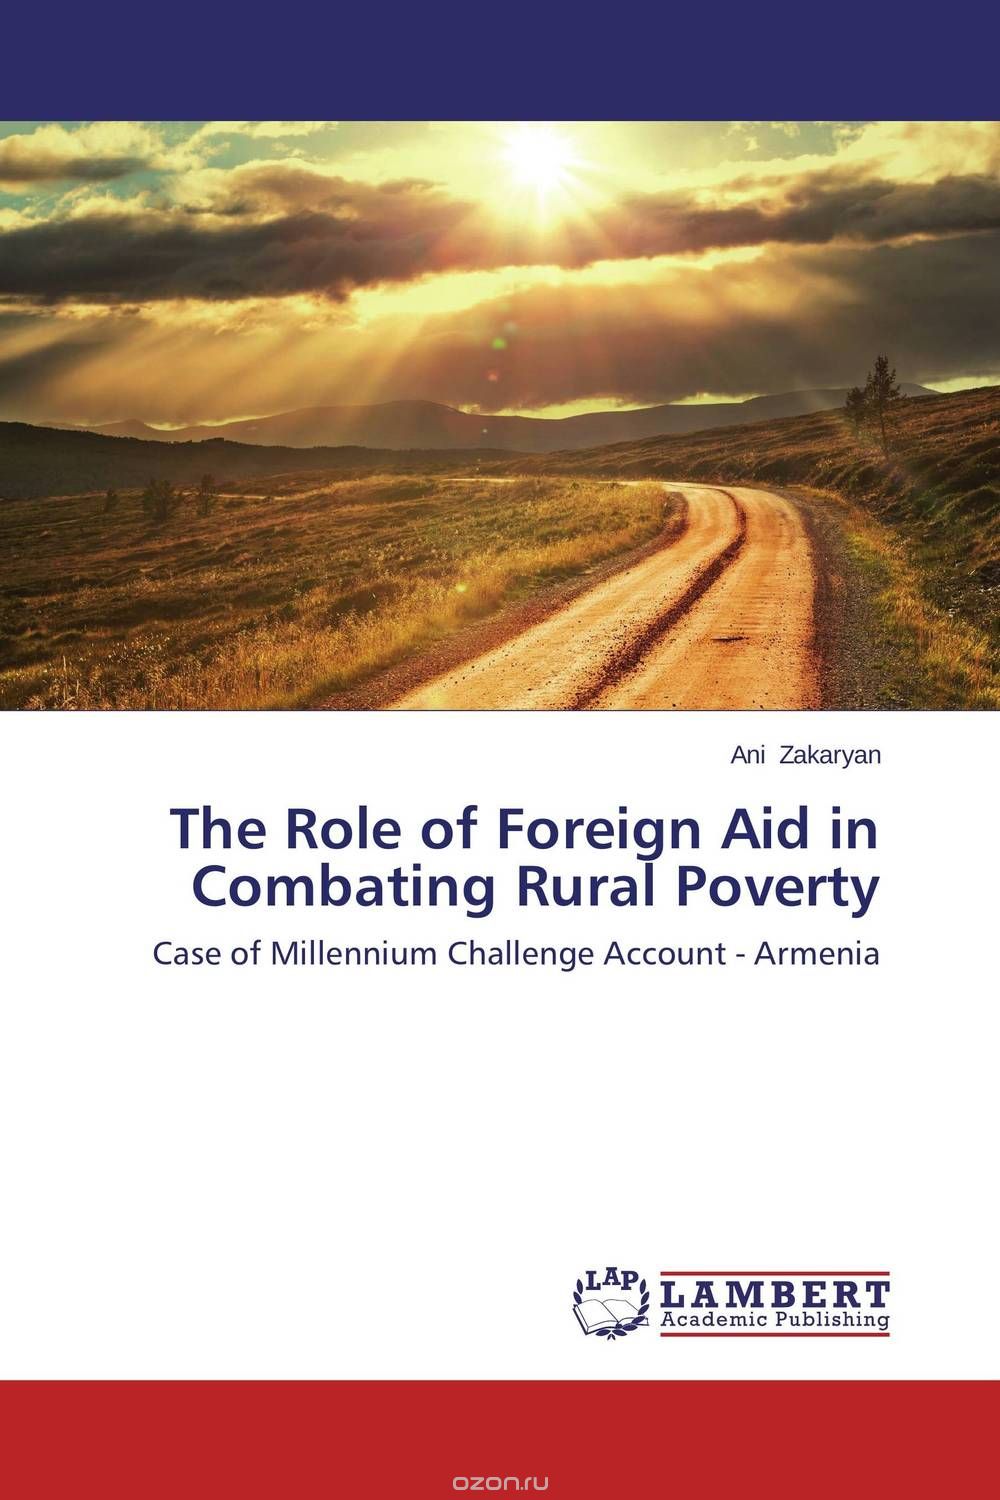 Скачать книгу "The Role of Foreign Aid in Combating Rural Poverty"